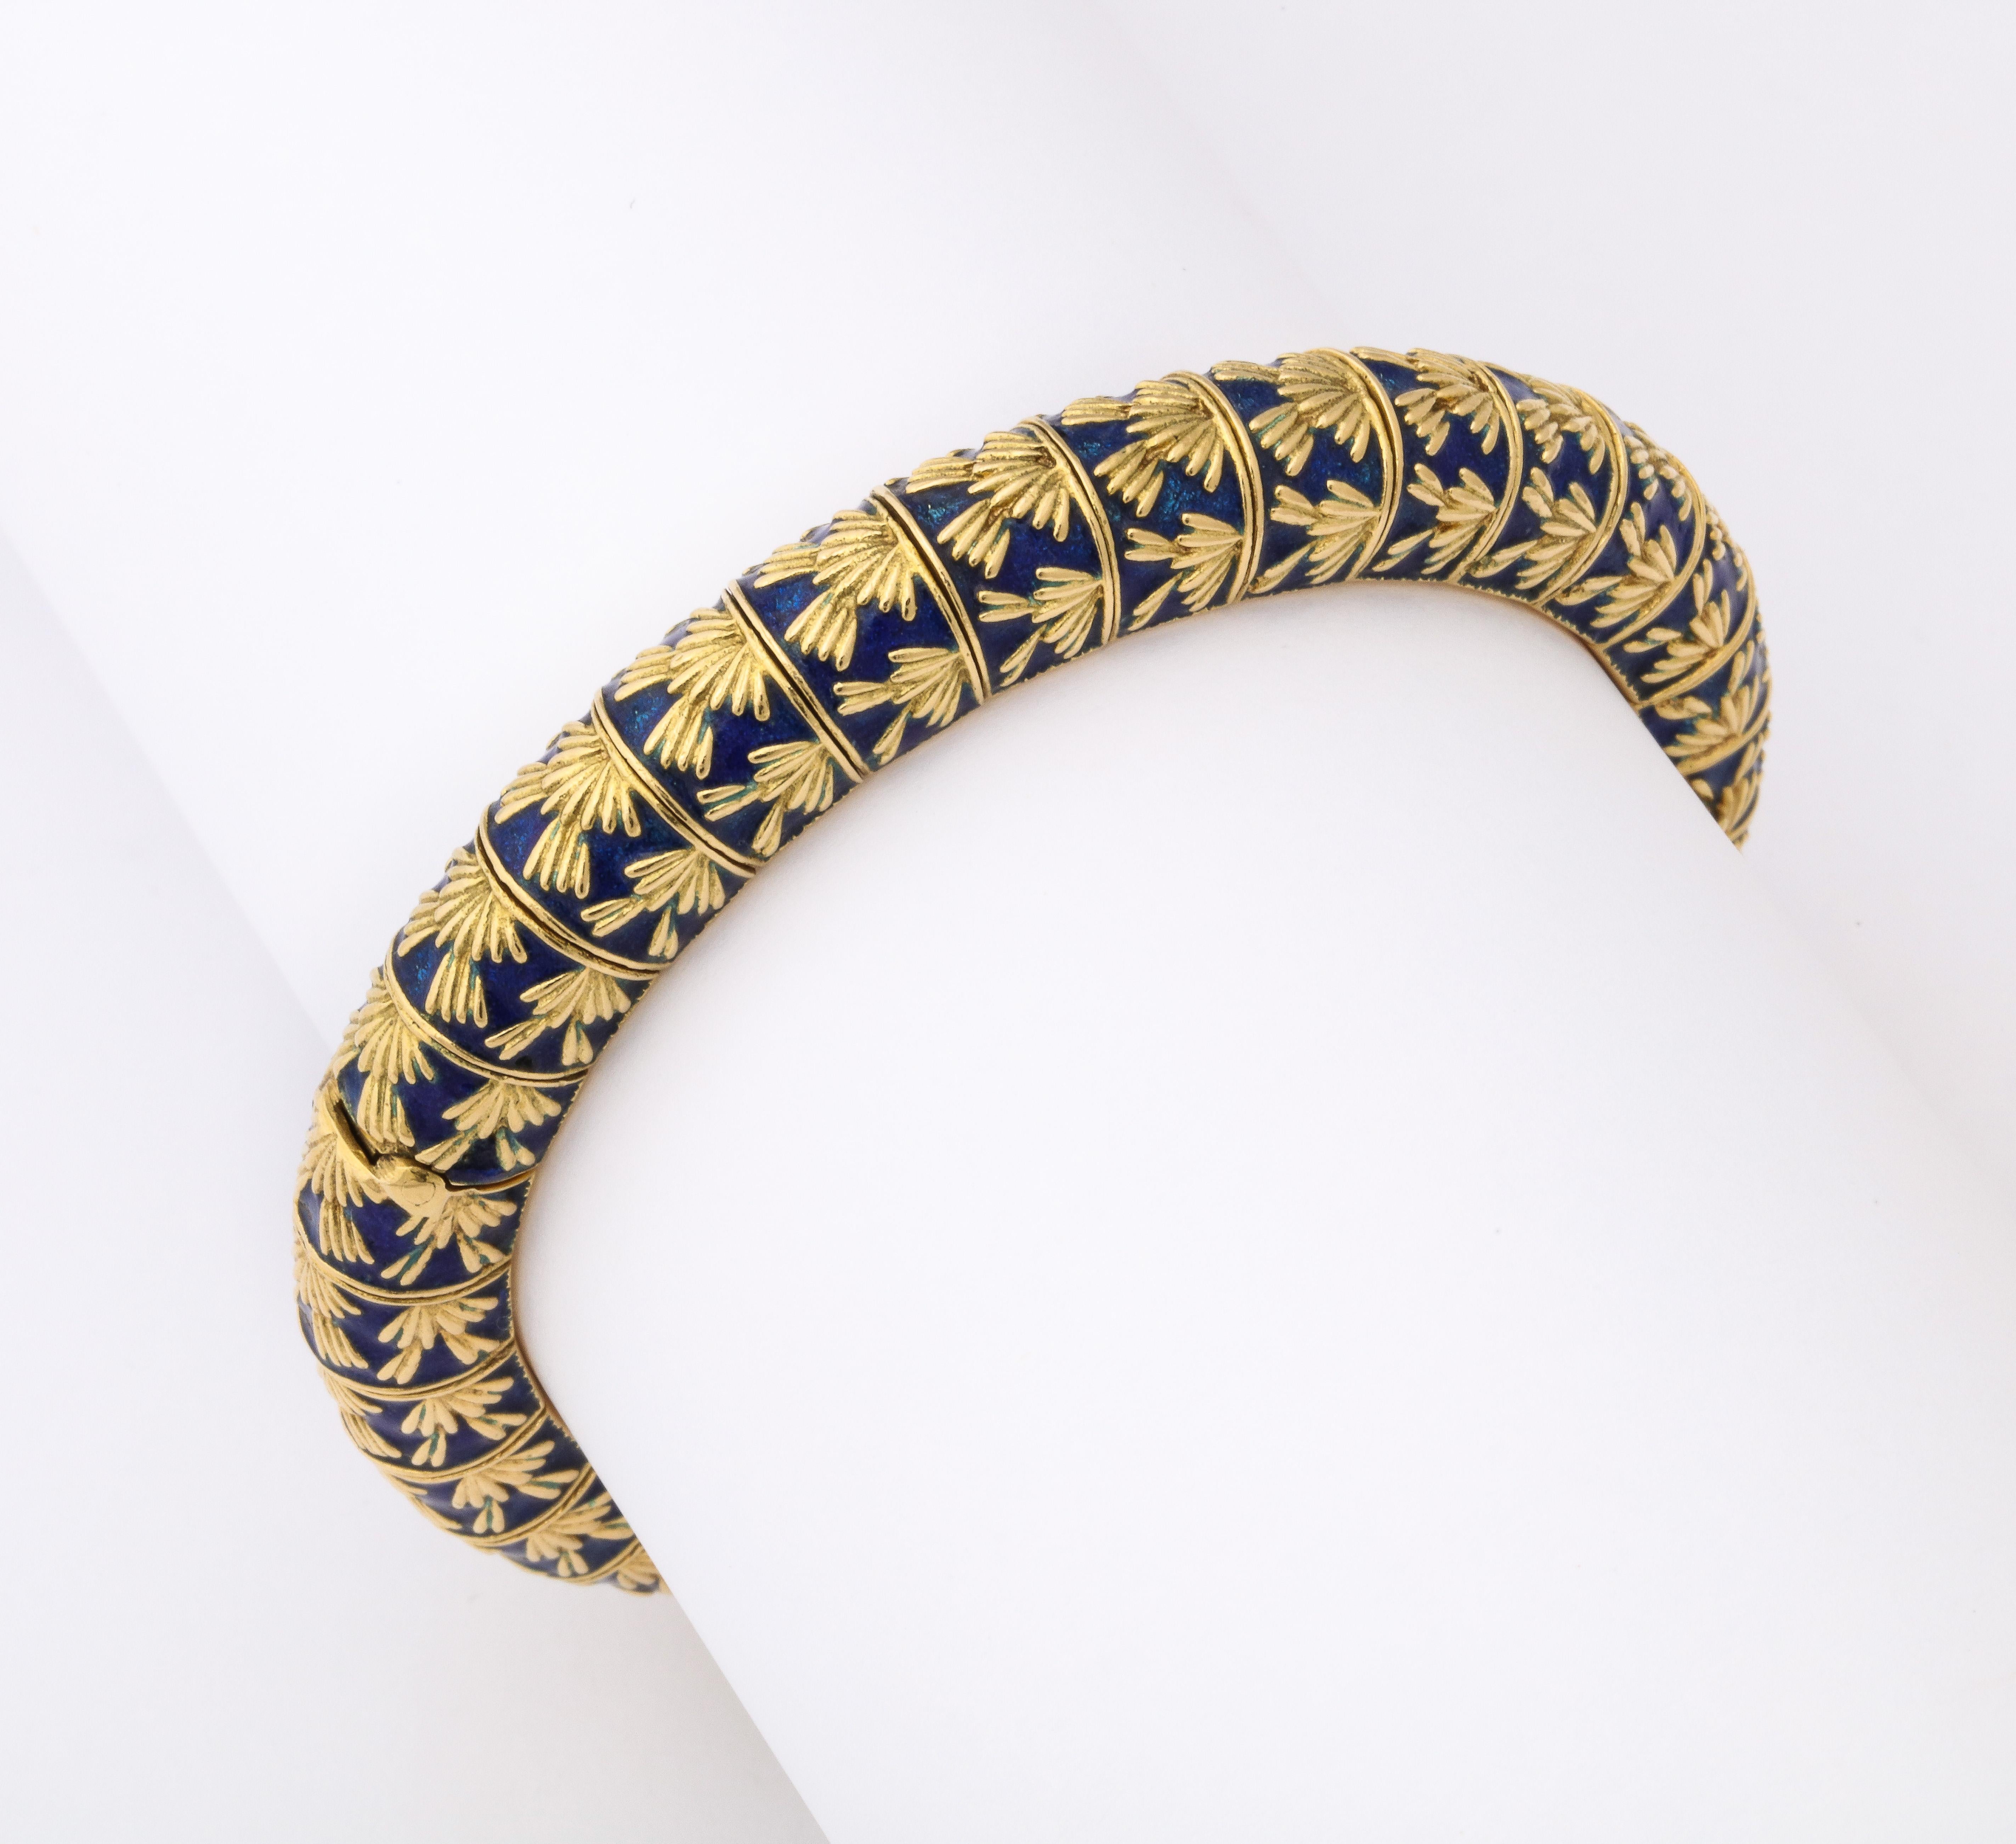 Tiffany & Co. Paris Blue Enamel Gold Bangle Bracelet In Excellent Condition For Sale In New York, NY